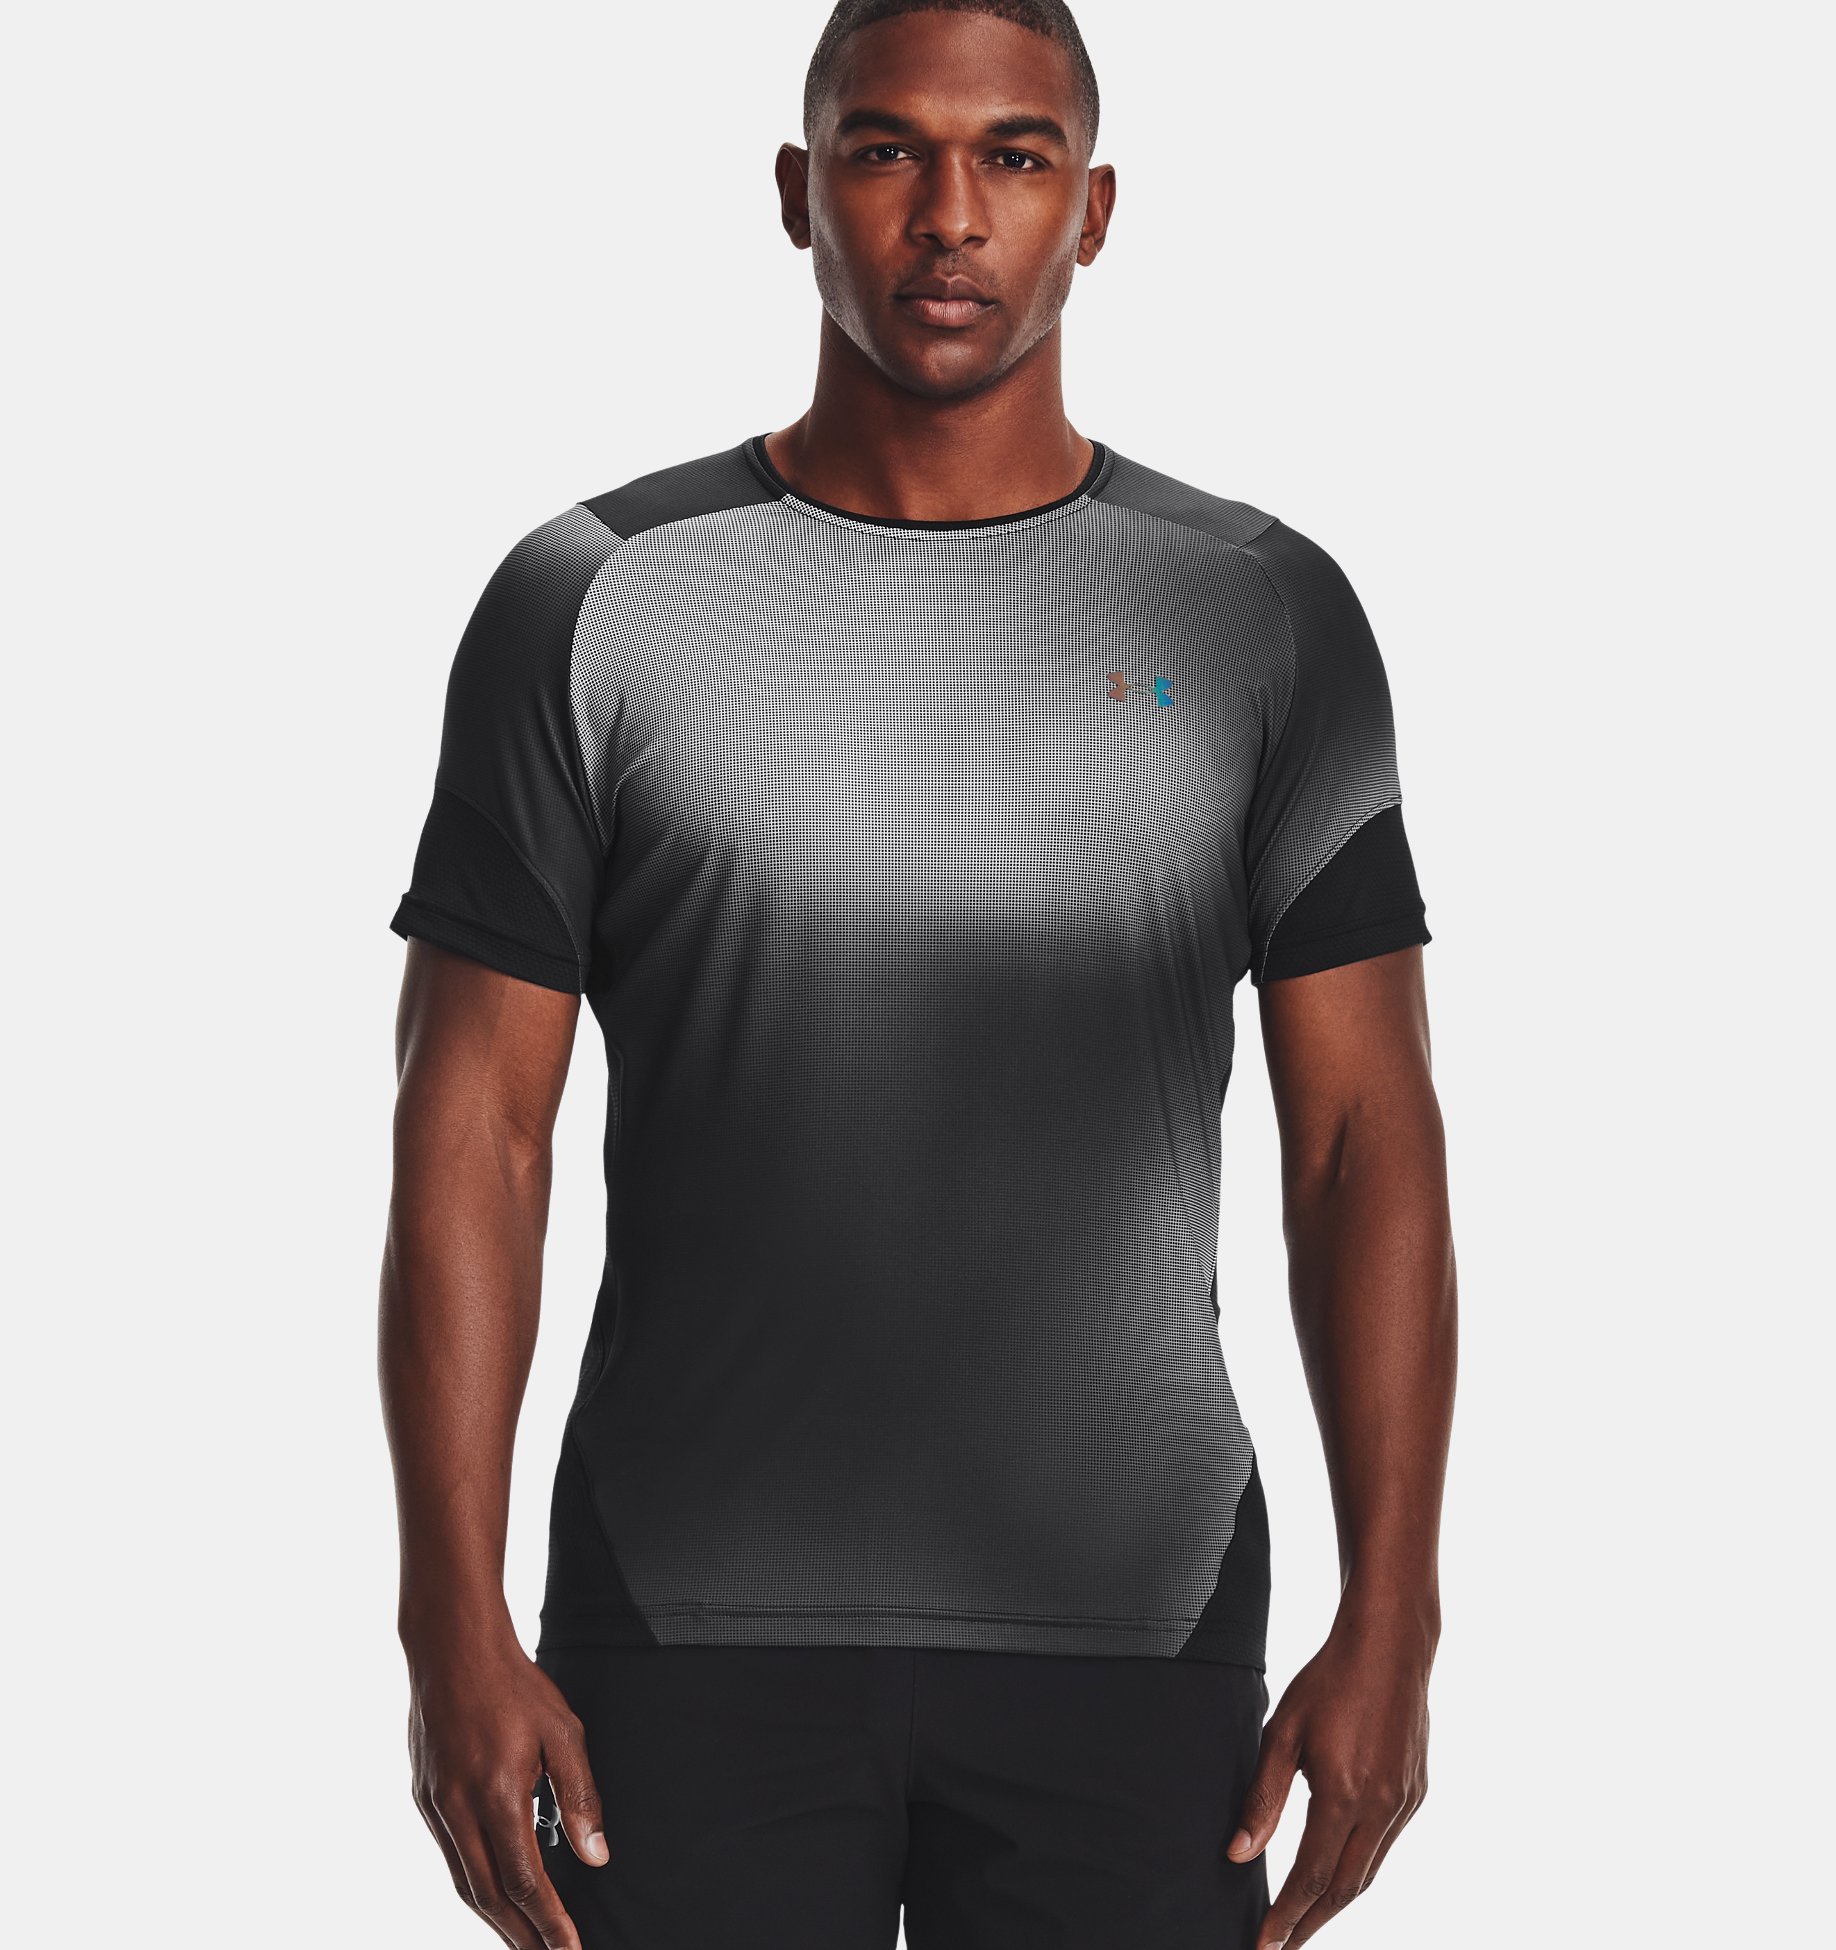 Under Armour Mens Sportstyle Printed Short Sleeve